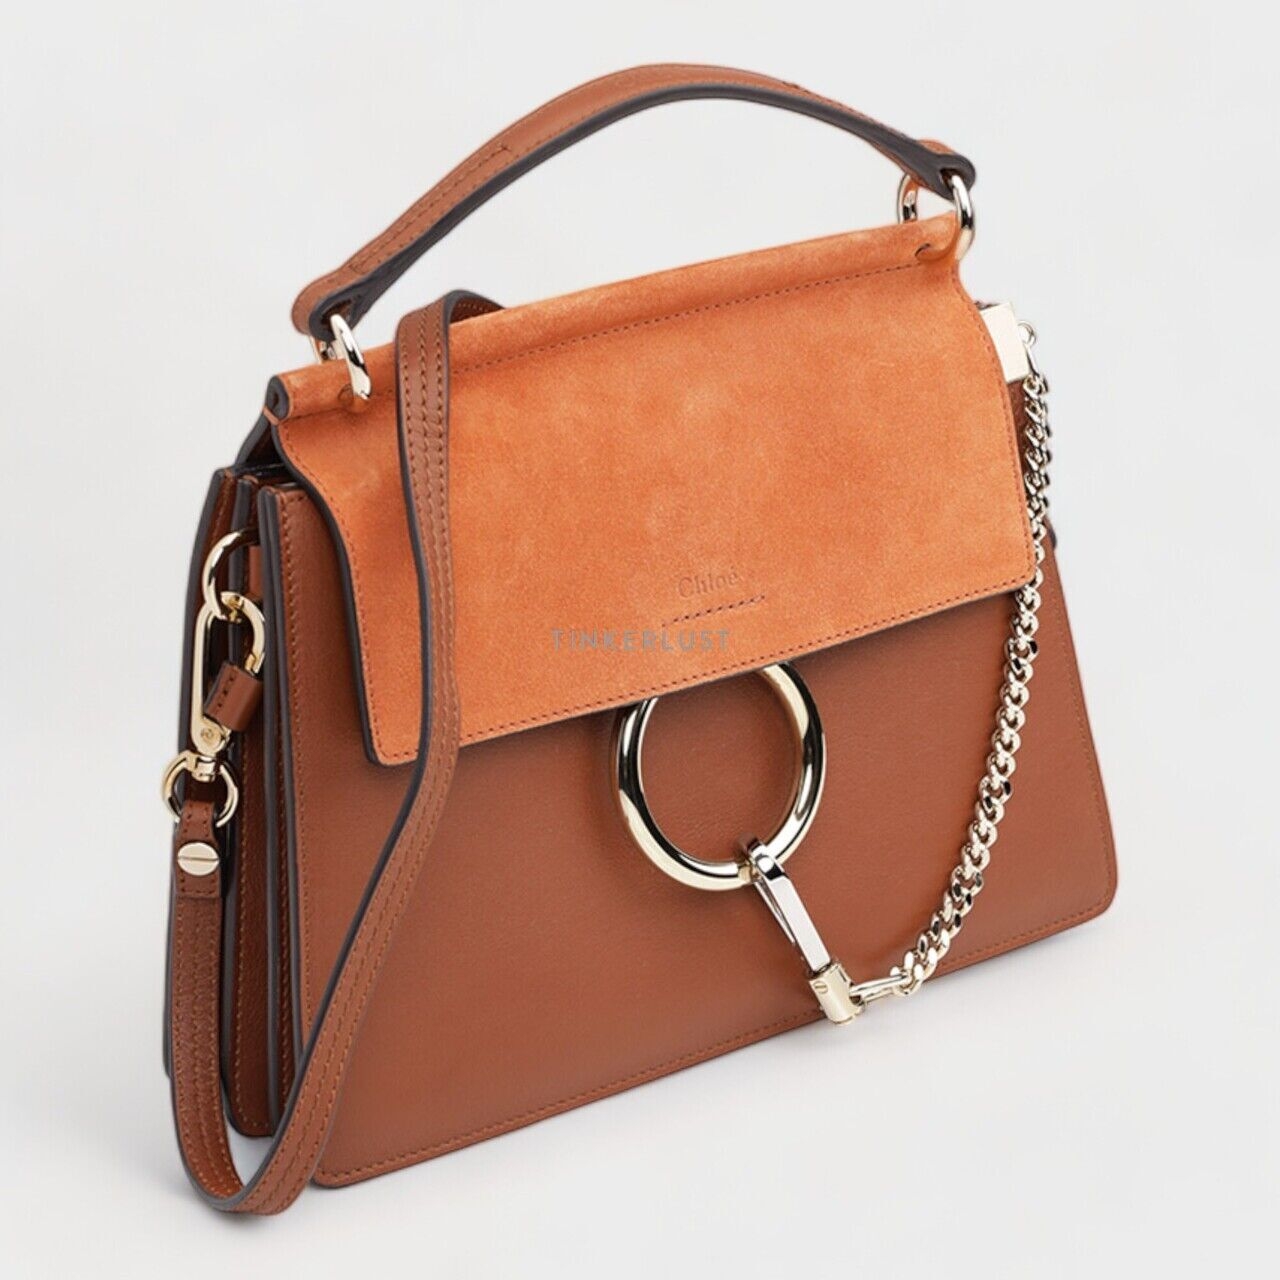 Chloe Small Faye Top Handle Bag in Classic Tobacco Smooth Leather x Suede Satchel